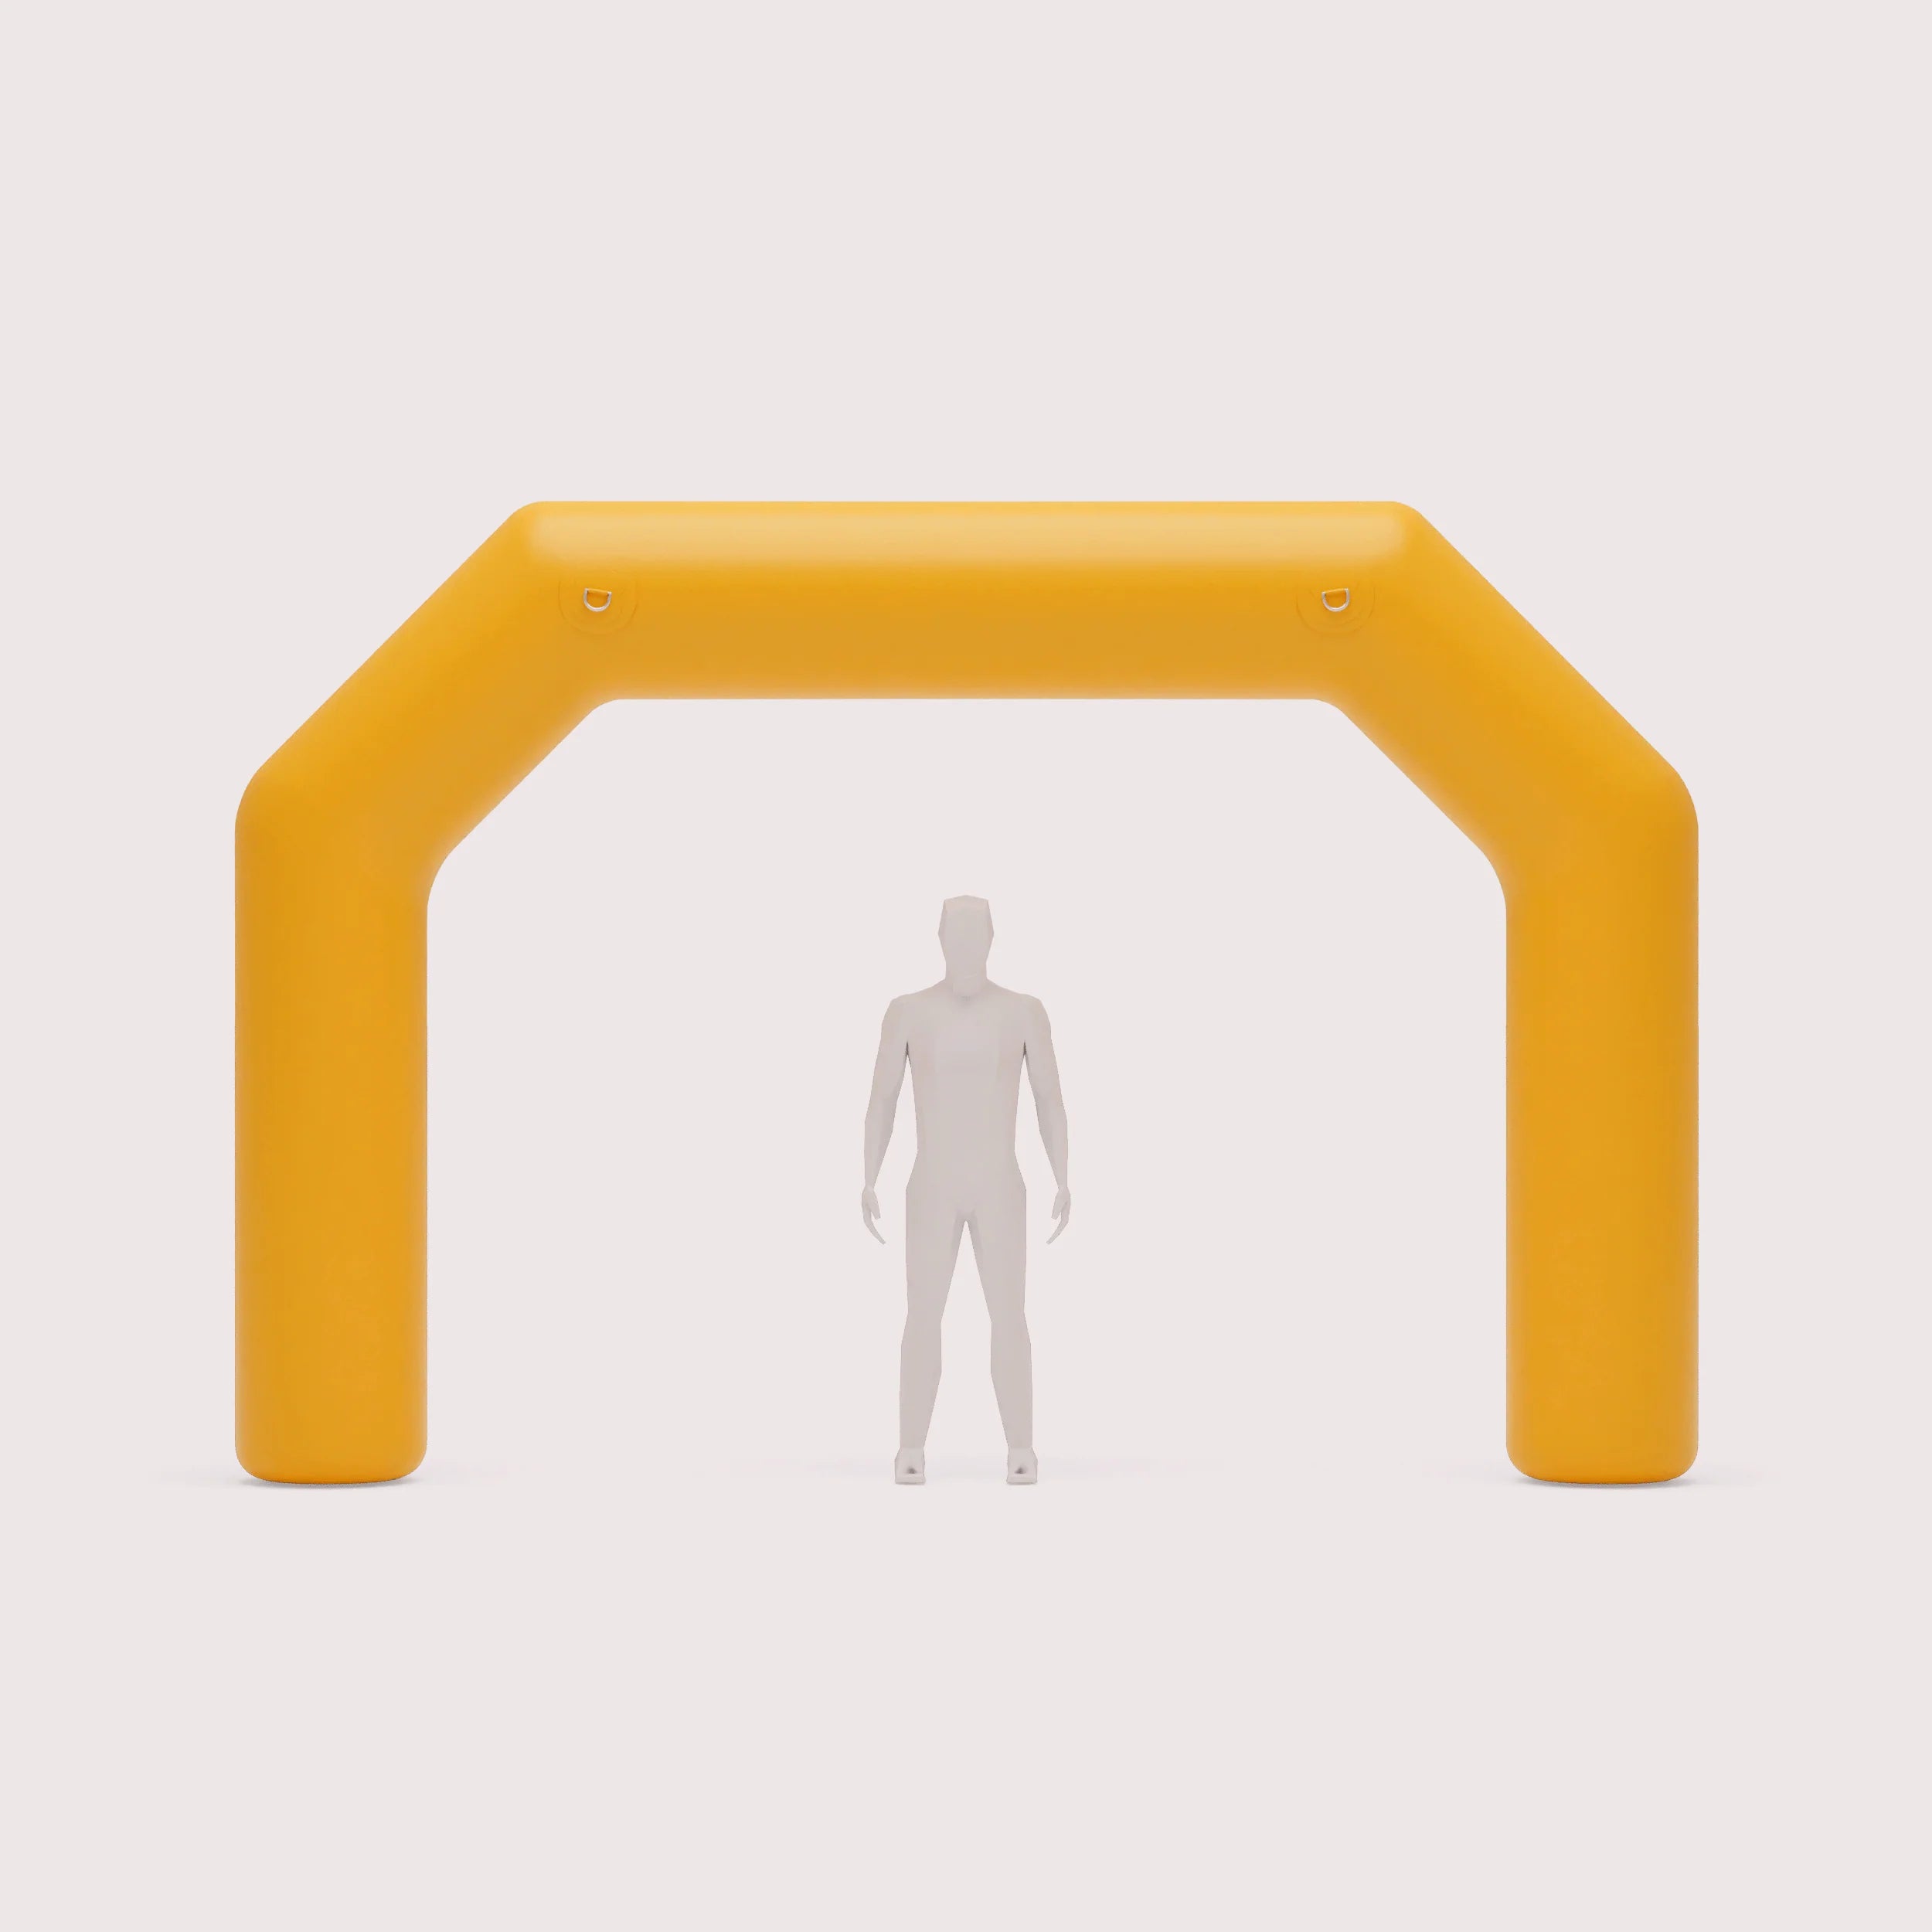 A figure stands under a vibrant yellow inflatable arch, illustrating the scale and simplicity of the structure.